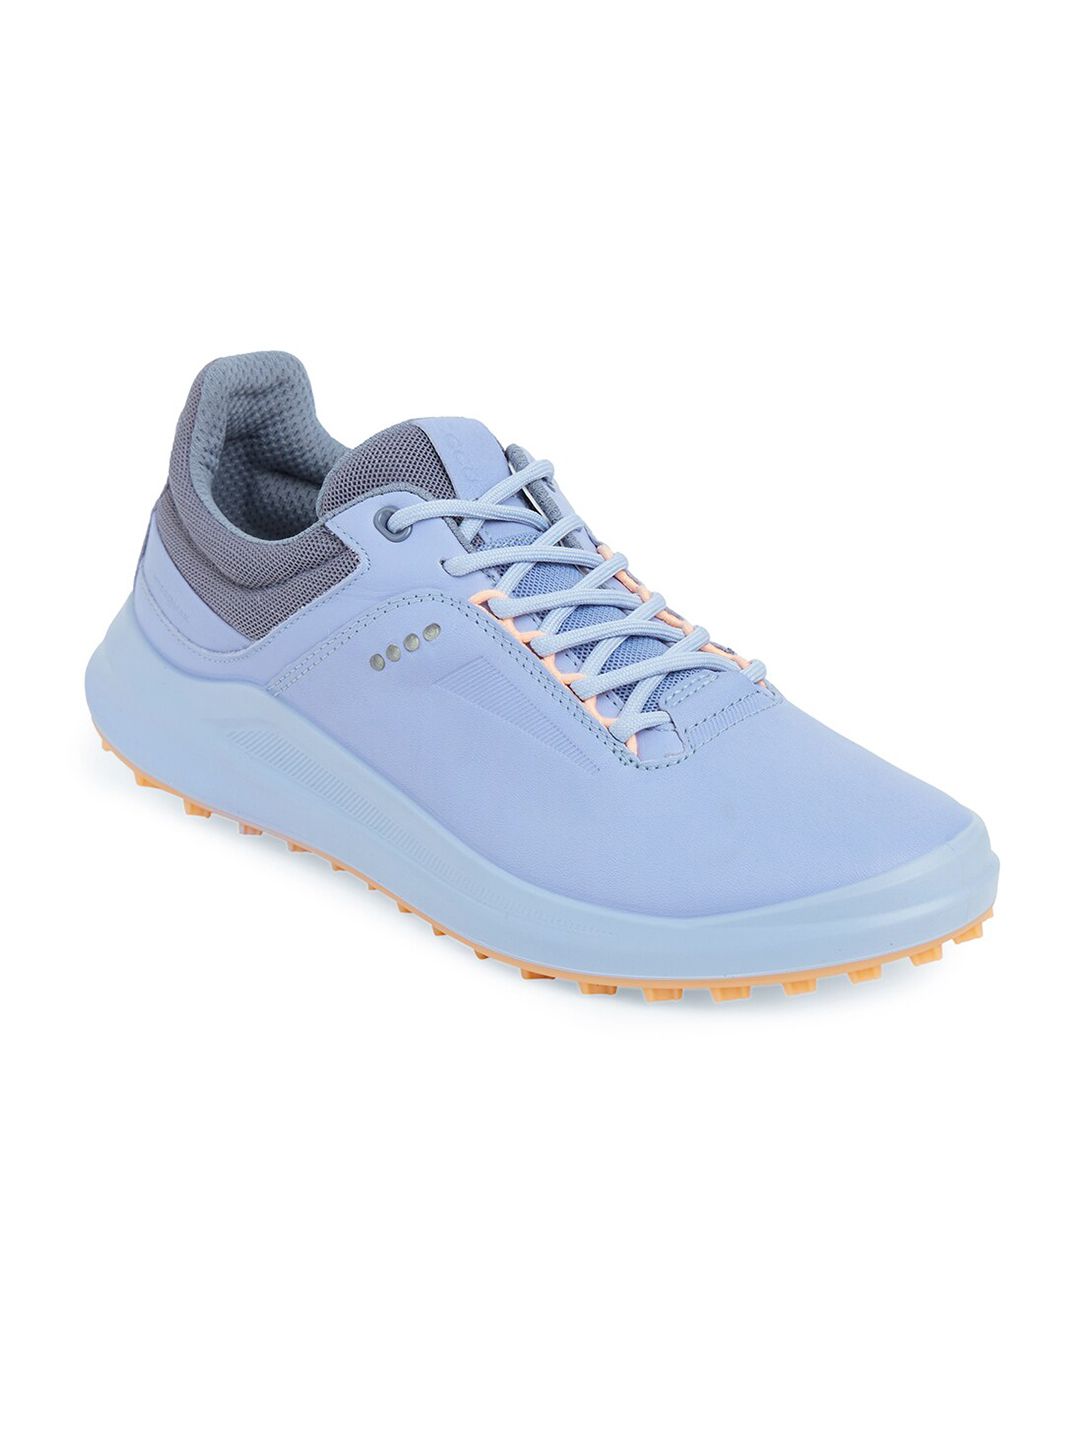 ECCO Women Blue Hybrid Leather Golf Non-Marking Shoes Price in India